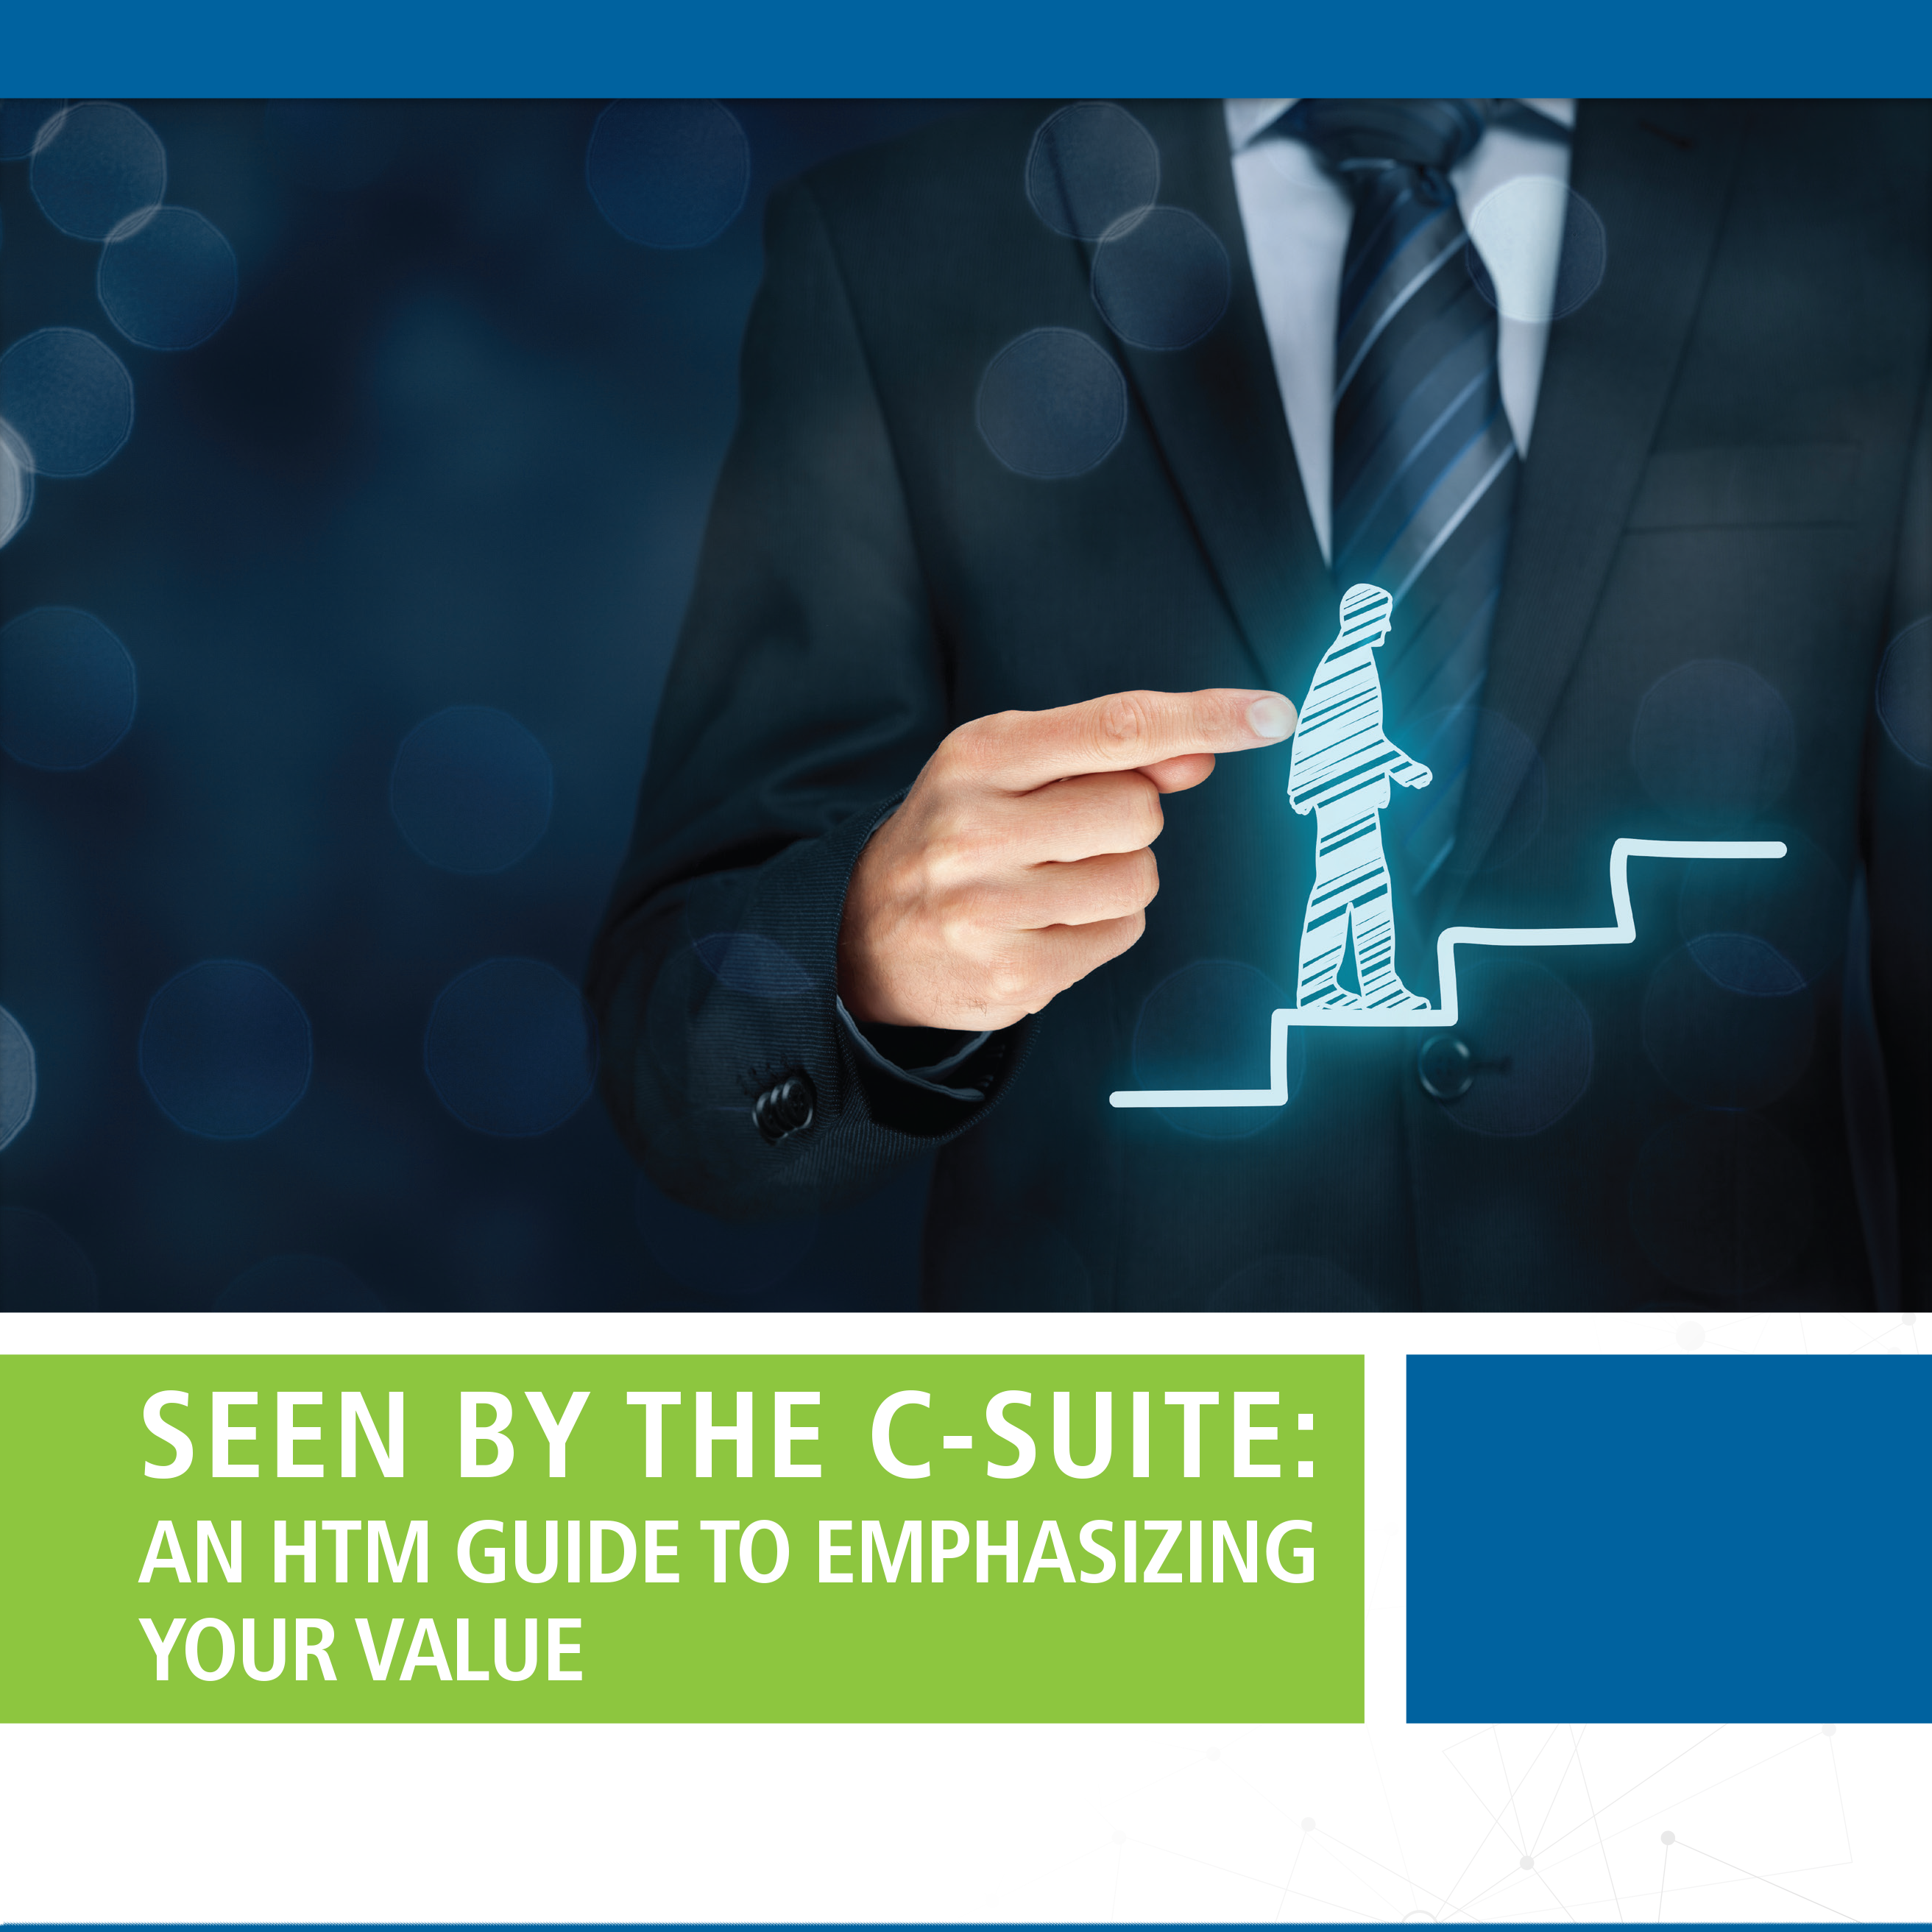 Seen By the C-Suite: An HTM Guide to Emphasizing Your Value